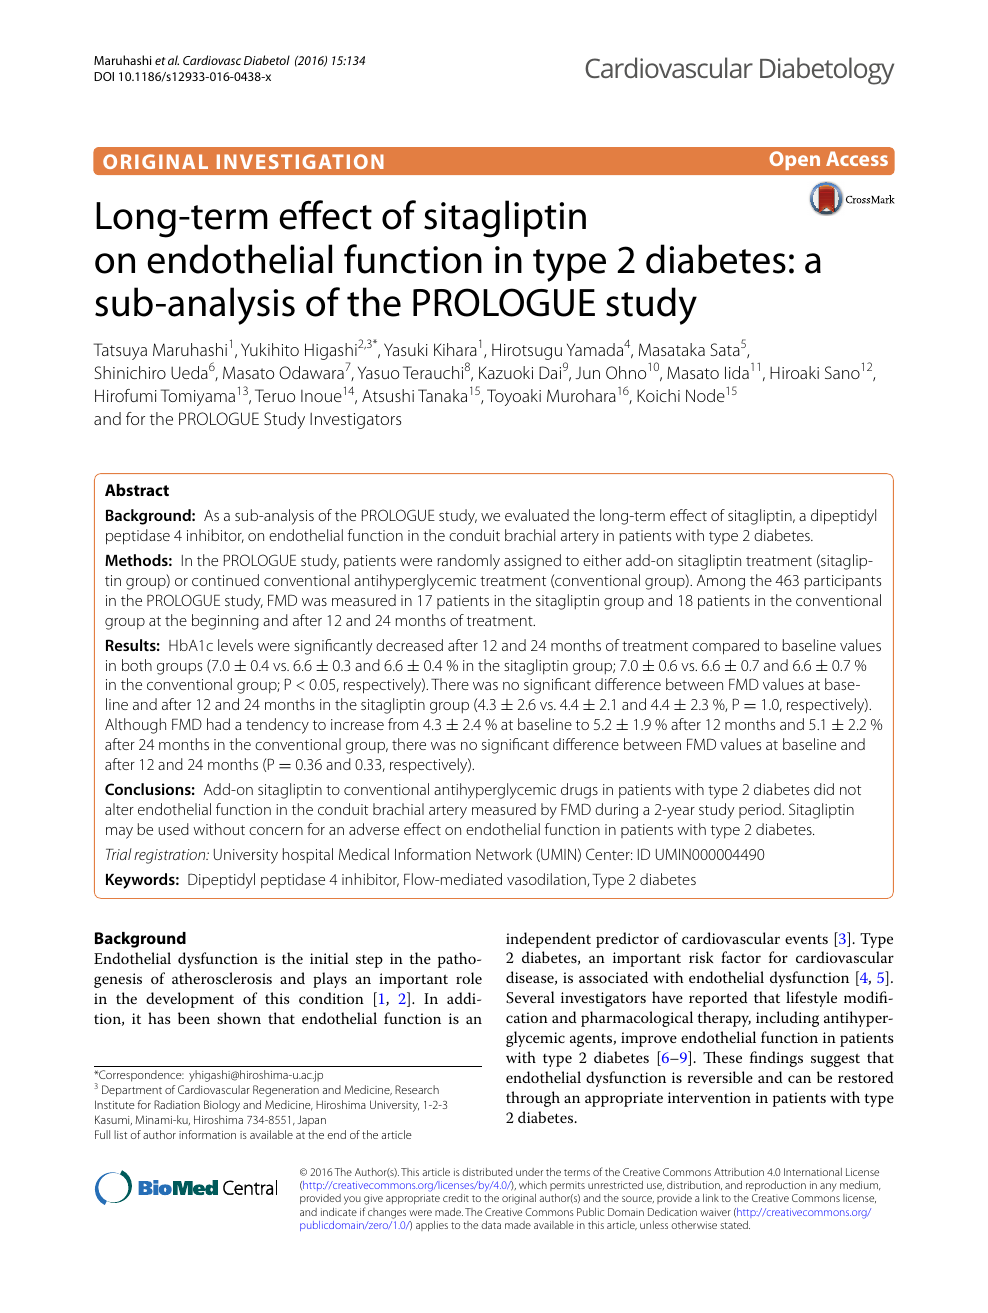 Long Term Effect Of Sitagliptin On Endothelial Function In Type 2 Diabetes A Sub Analysis Of The Prologue Study Topic Of Research Paper In Clinical Medicine Download Scholarly Article Pdf And Read For